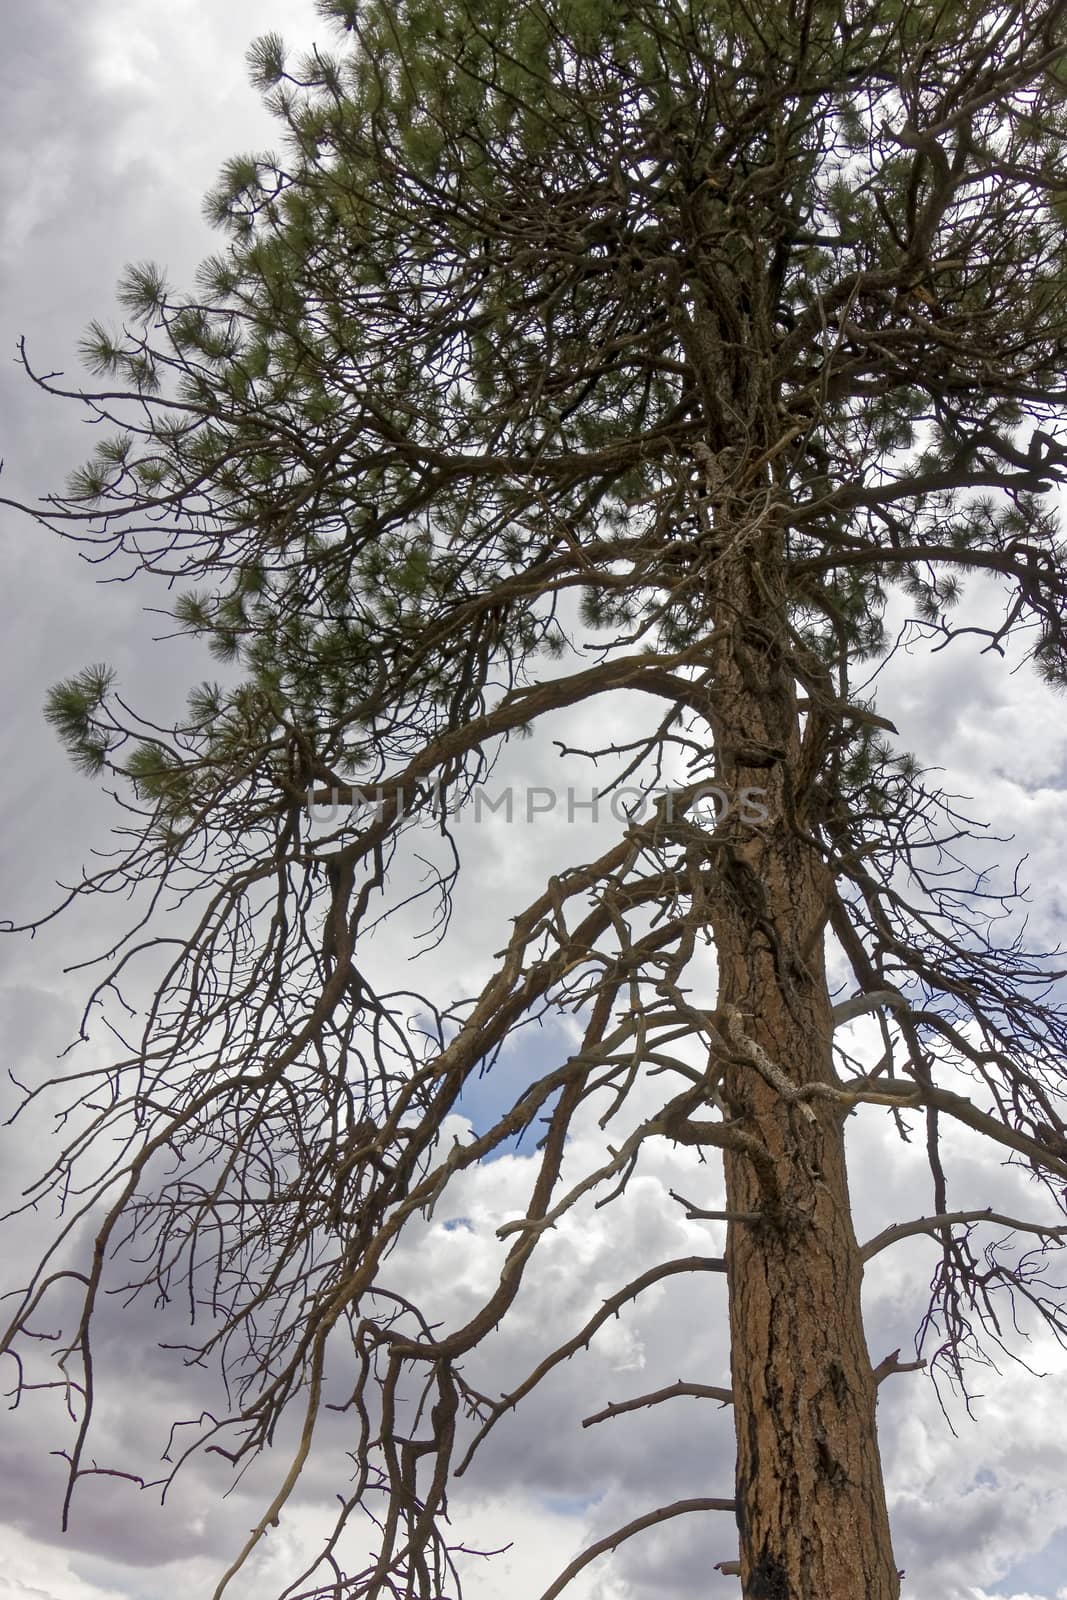 Scorched Tree in Kaibab forest by bkenney5@gmail.com